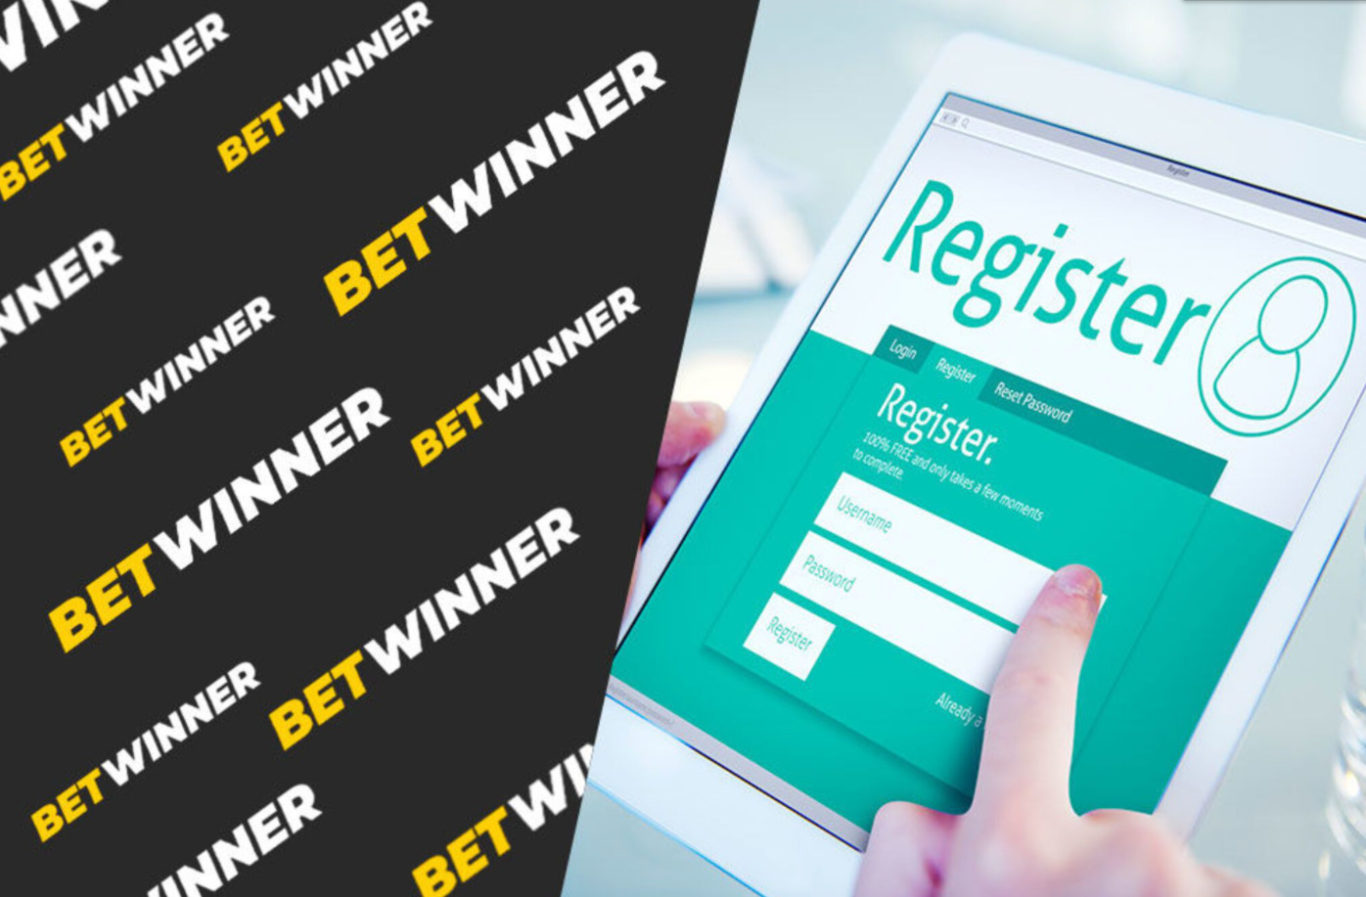 login the official site Betwinner Nigeria